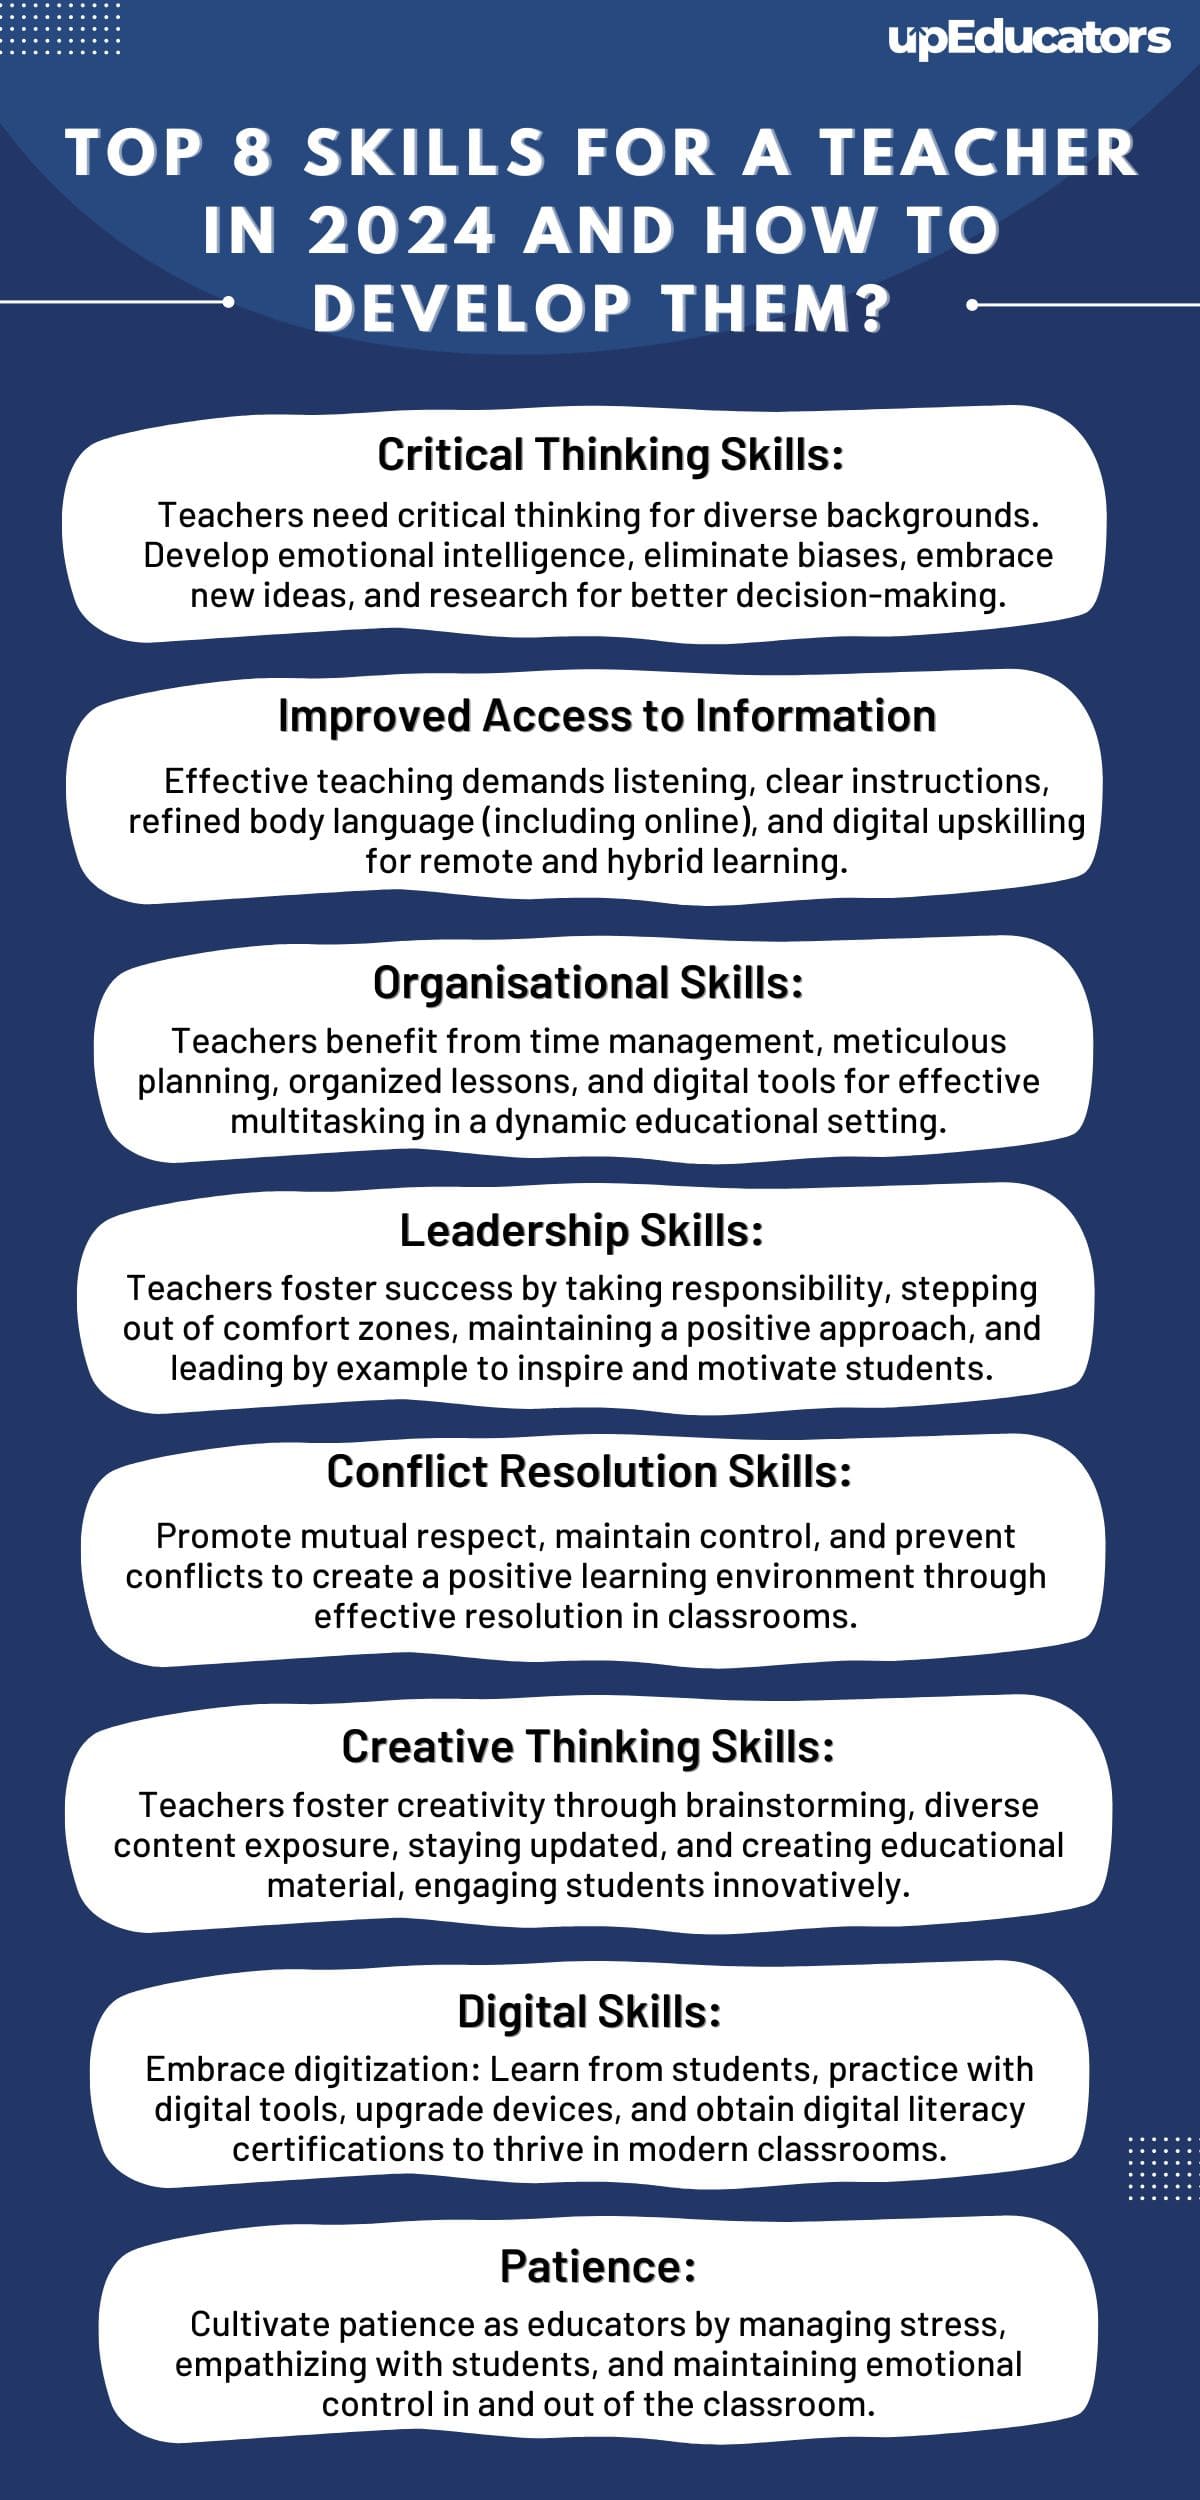 Top 8 Skills For A Teacher In 2022 And How To Develop Them 1 2 